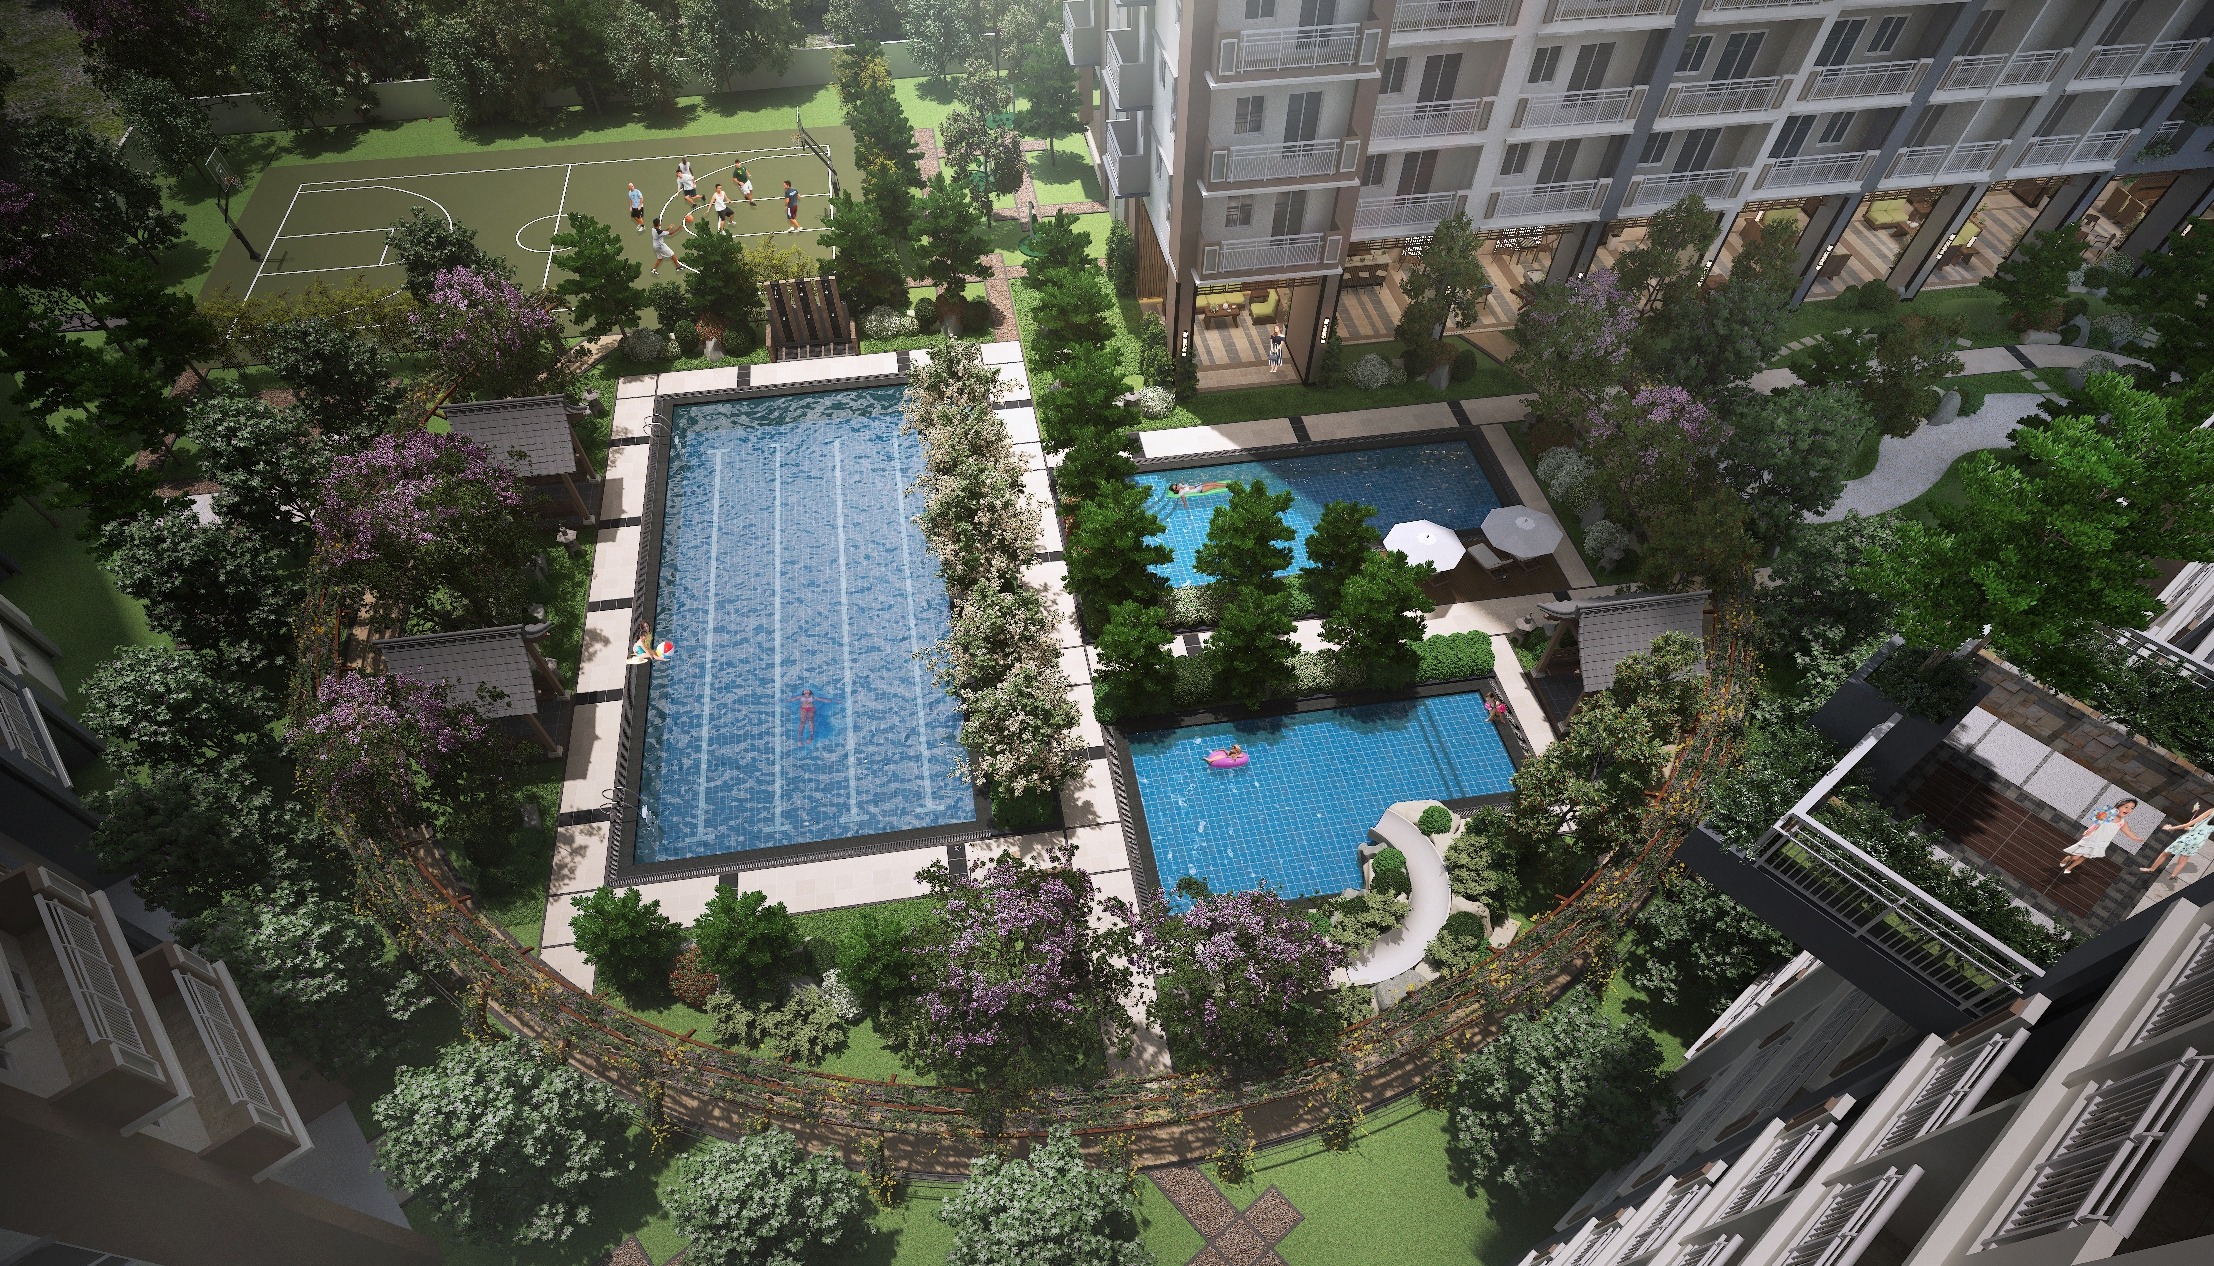 Digital render of the top view of a swimming pool area